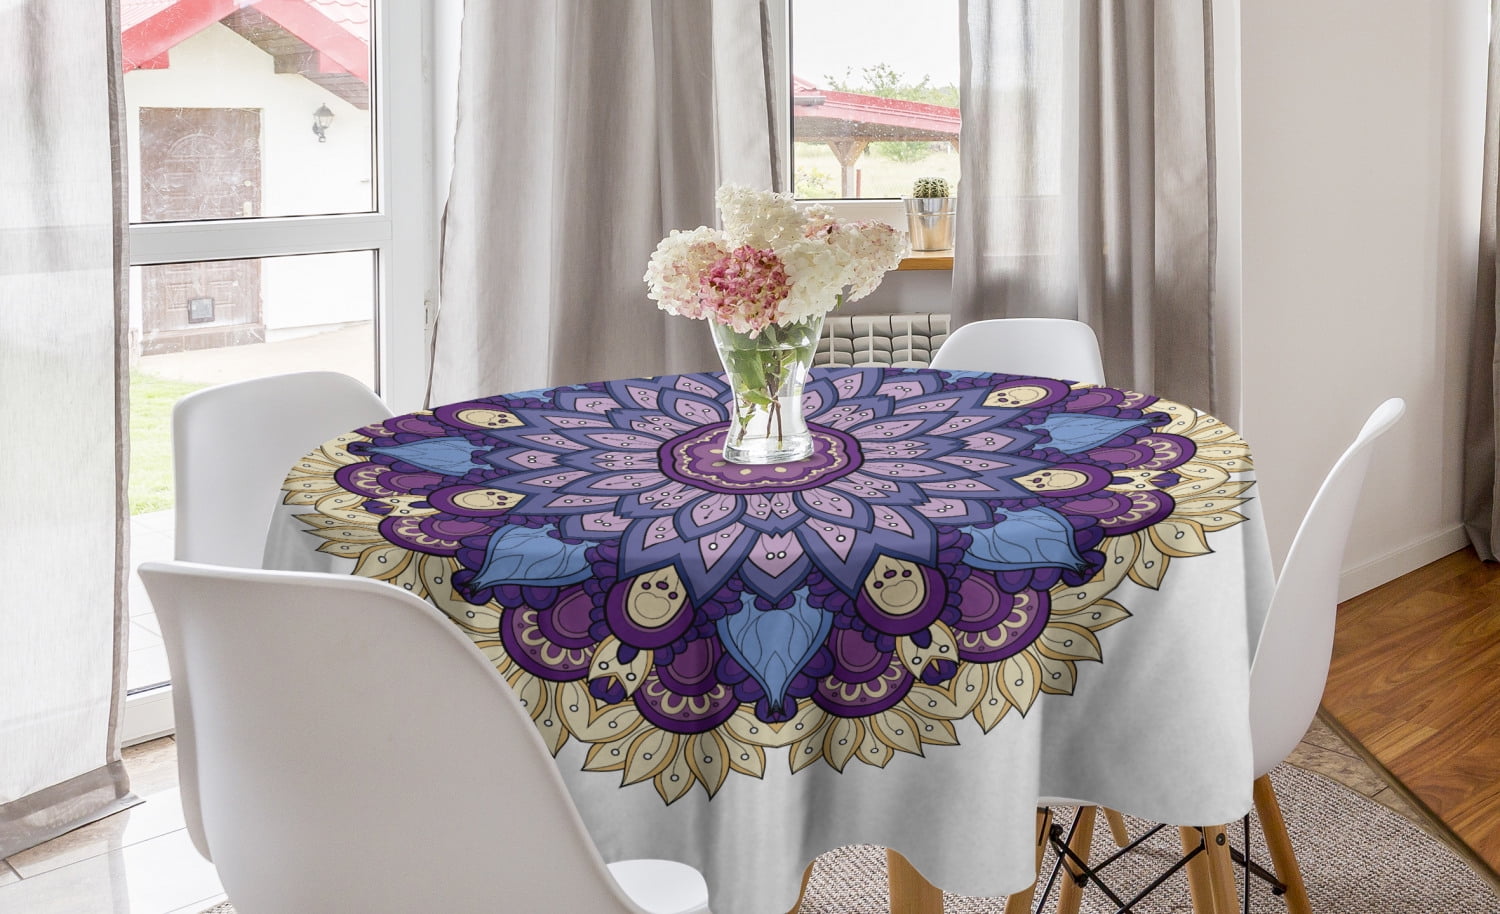 Multicolor Washable Fabric Placemats for Dining Room Kitchen Table Decor Ambesonne Rainbow Mandala Place Mats Set of 4 Composition with Blooming Flower Design Mystical Oriental Petals